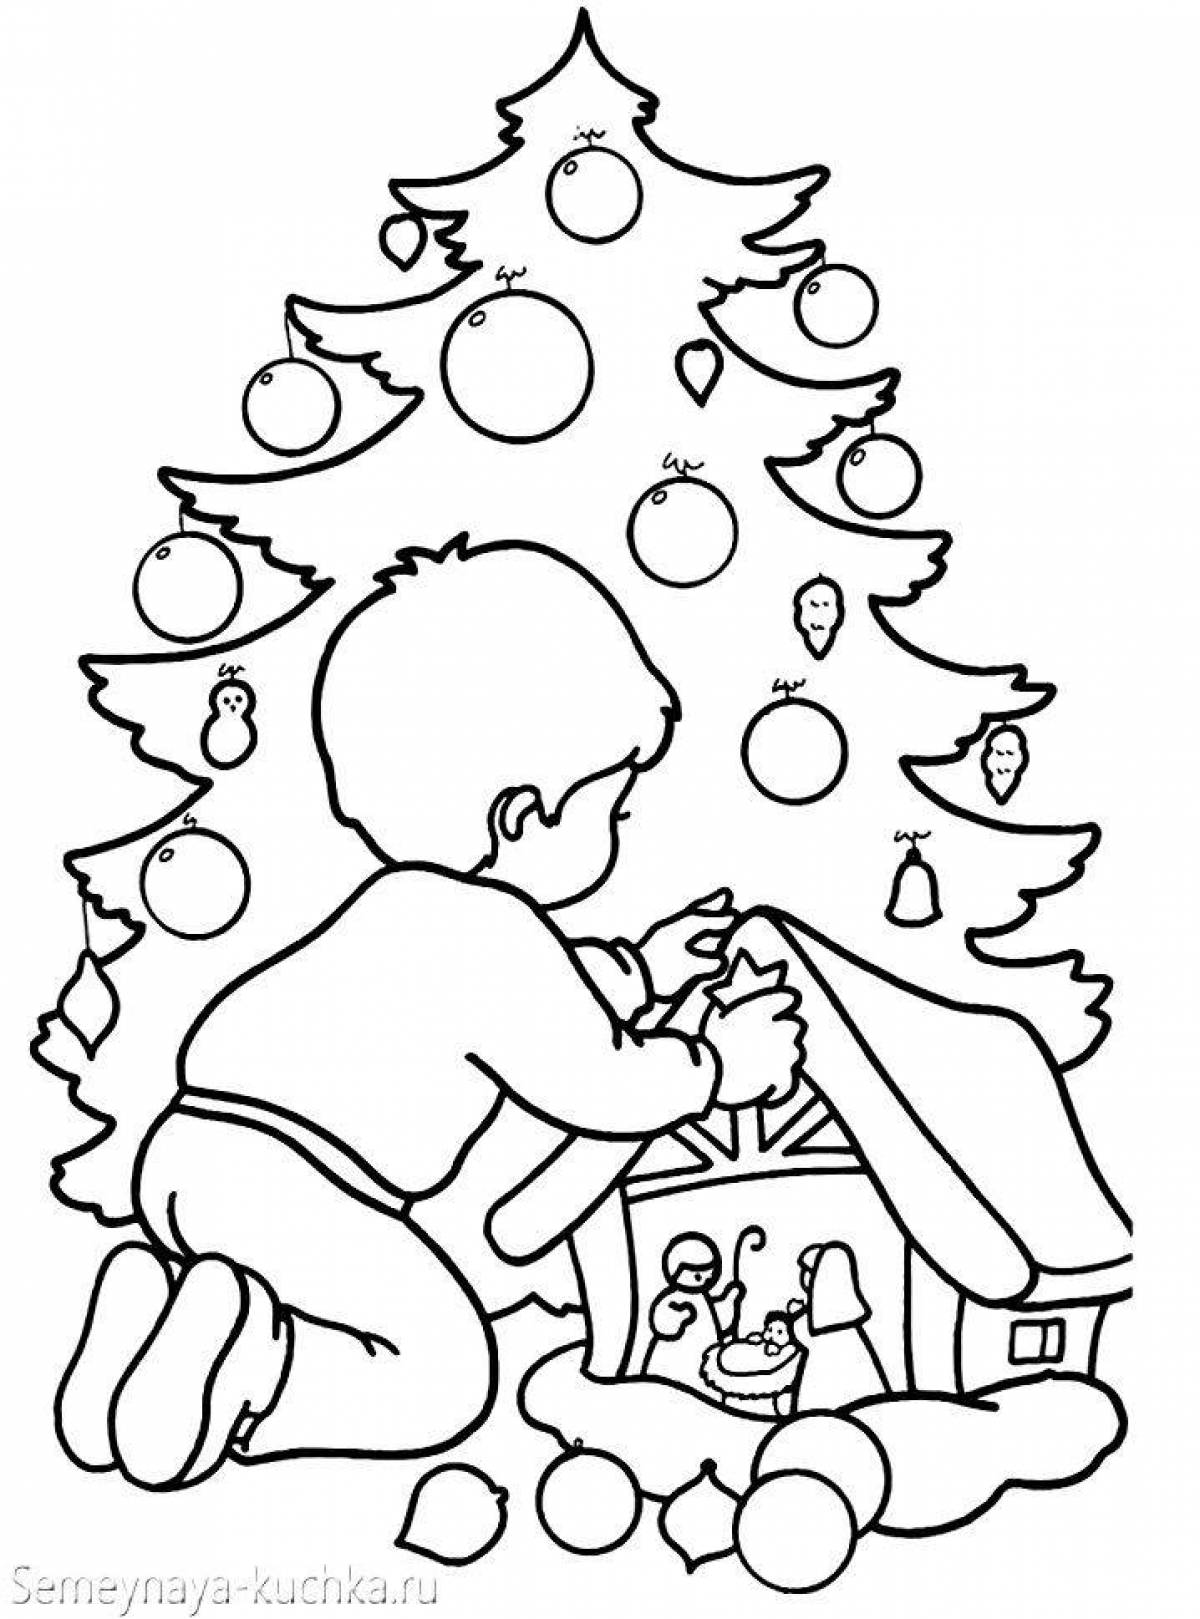 Jazzy christmas coloring book for kids